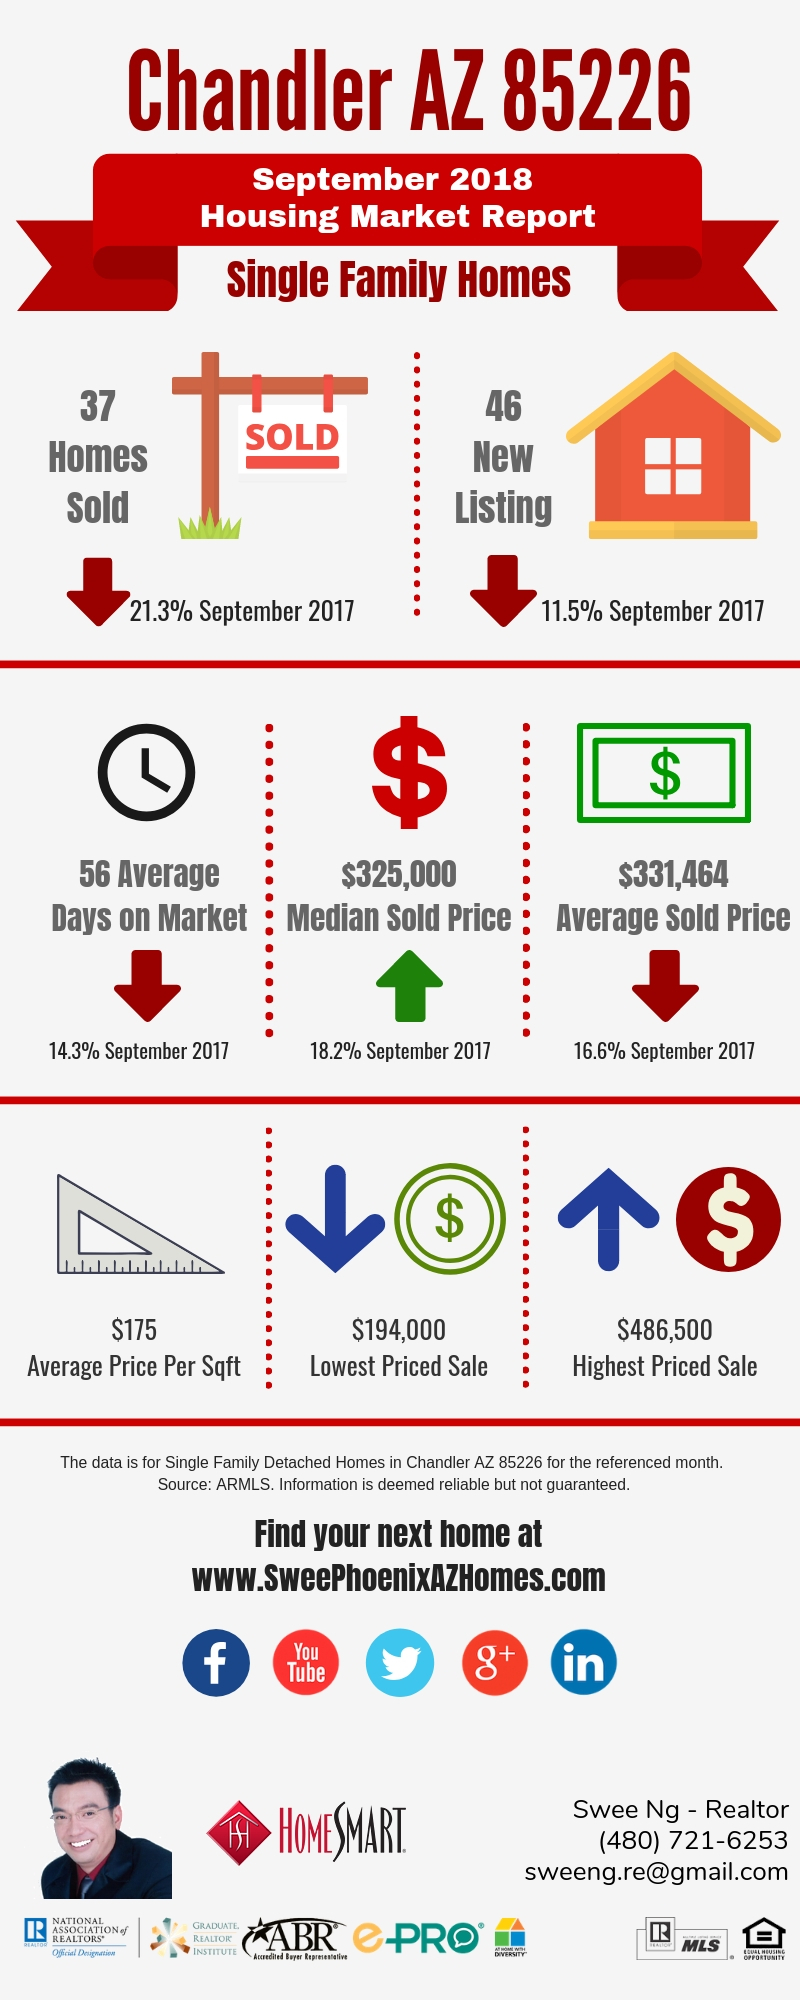 Chandler AZ 85226 Housing Market Trends Report September 2018, House Value, Real Estate and Statistic by Swee Ng